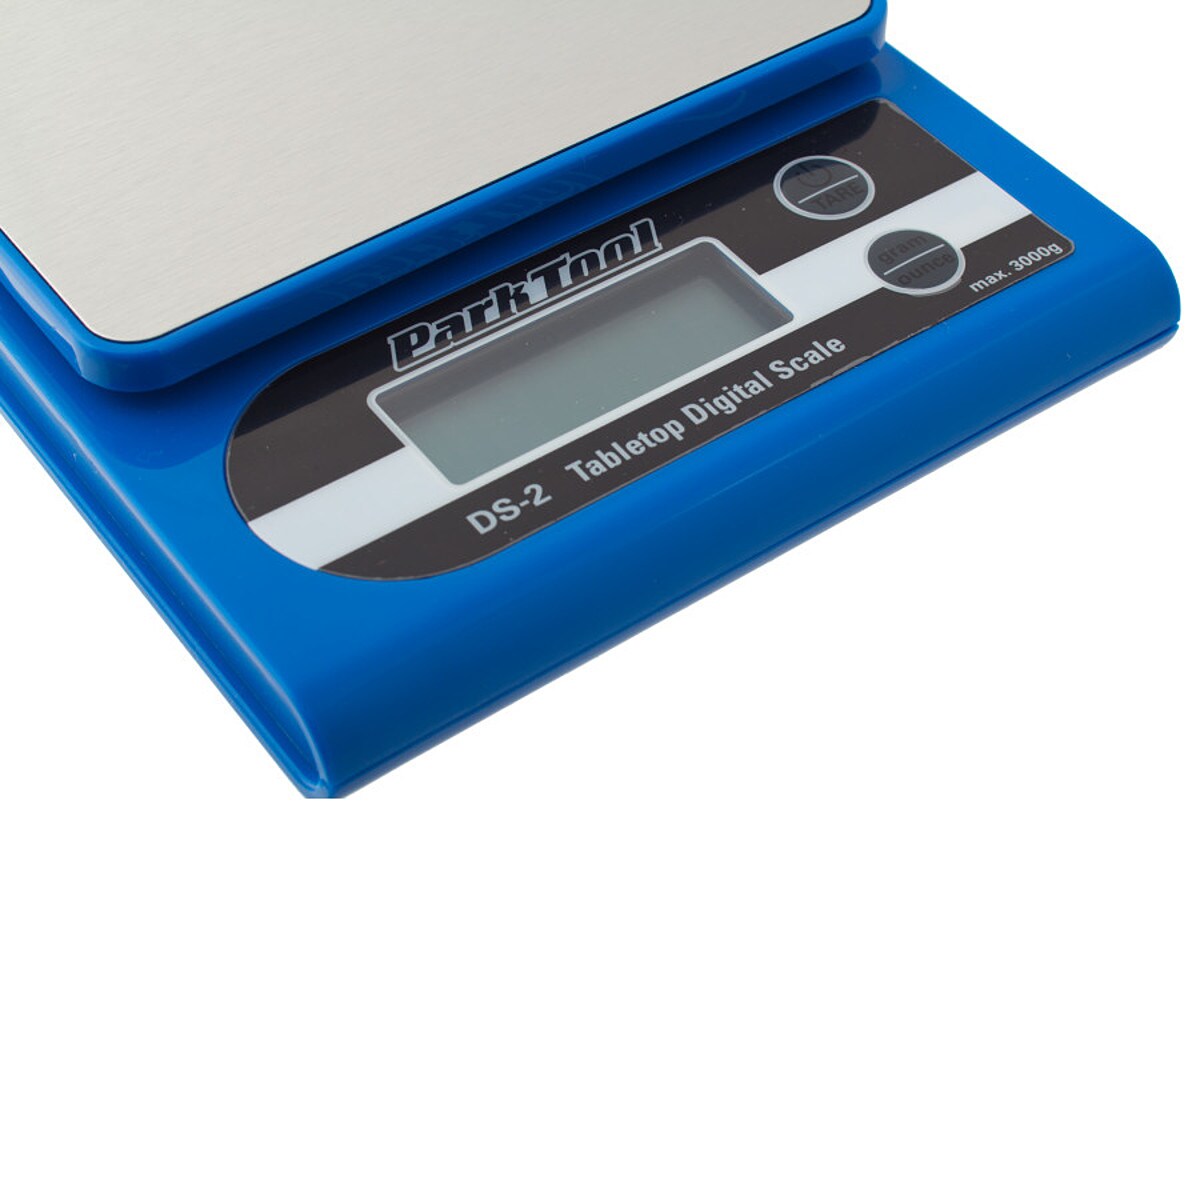 Park Tool DS-2 Tabletop Digital Scale Excel Sports